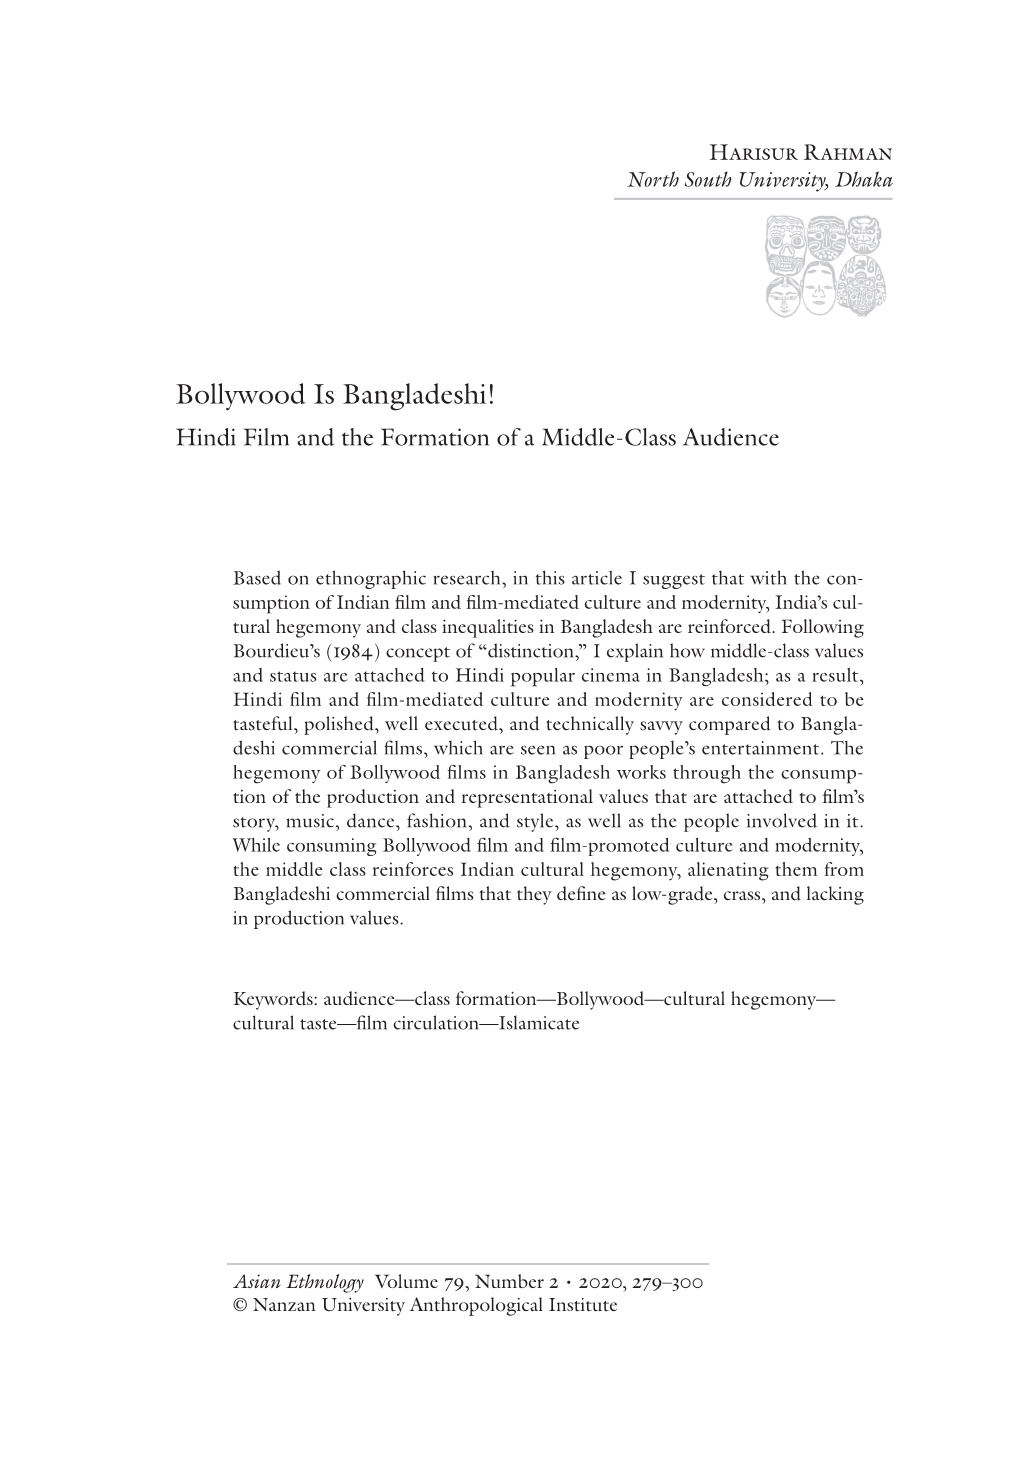 Bollywood Is Bangladeshi! Hindi Film and the Formation of a Middle-Class Audience